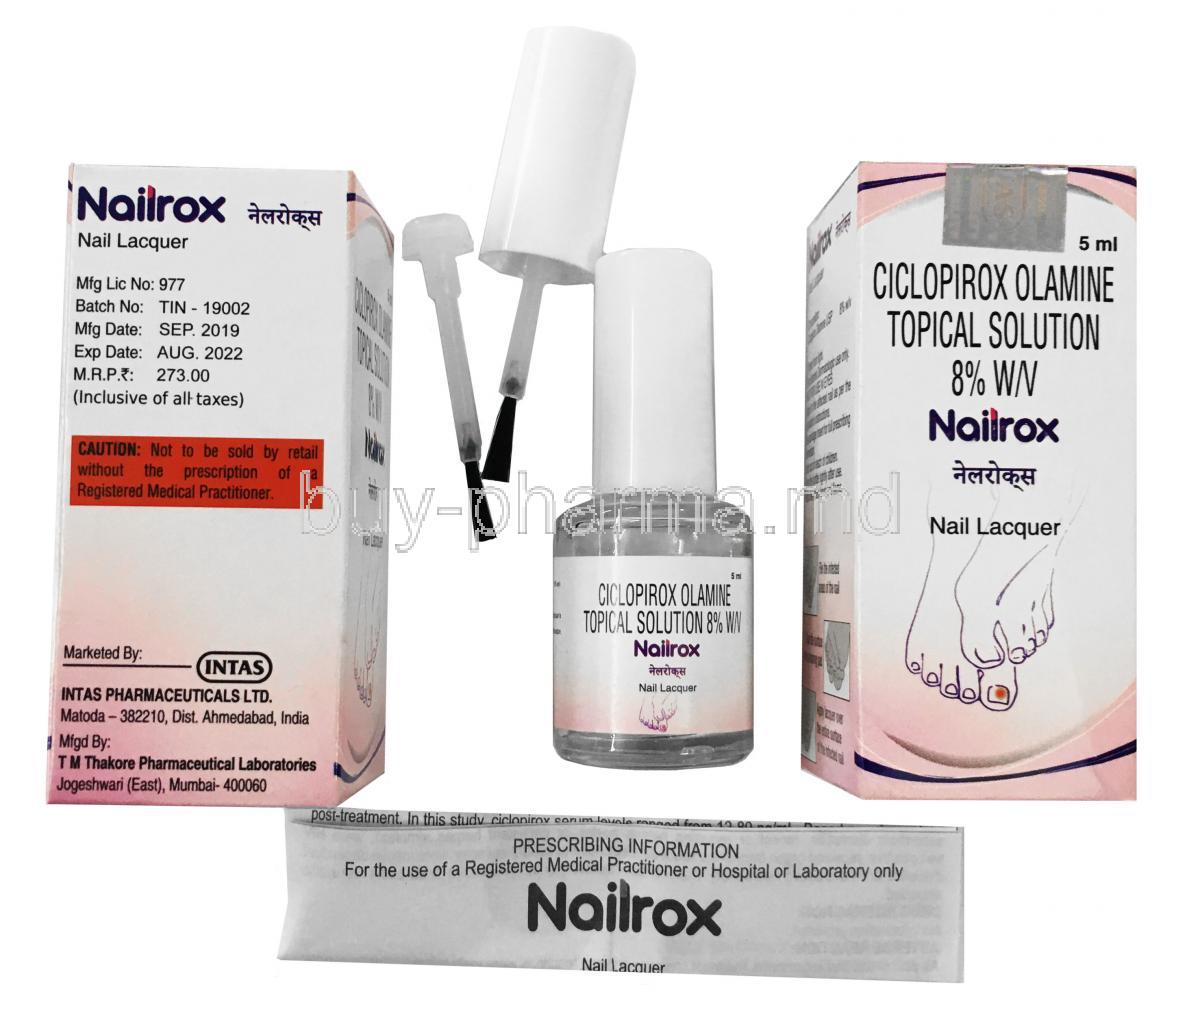 Nailrox Nail Lacquer box, bottle and leaflet